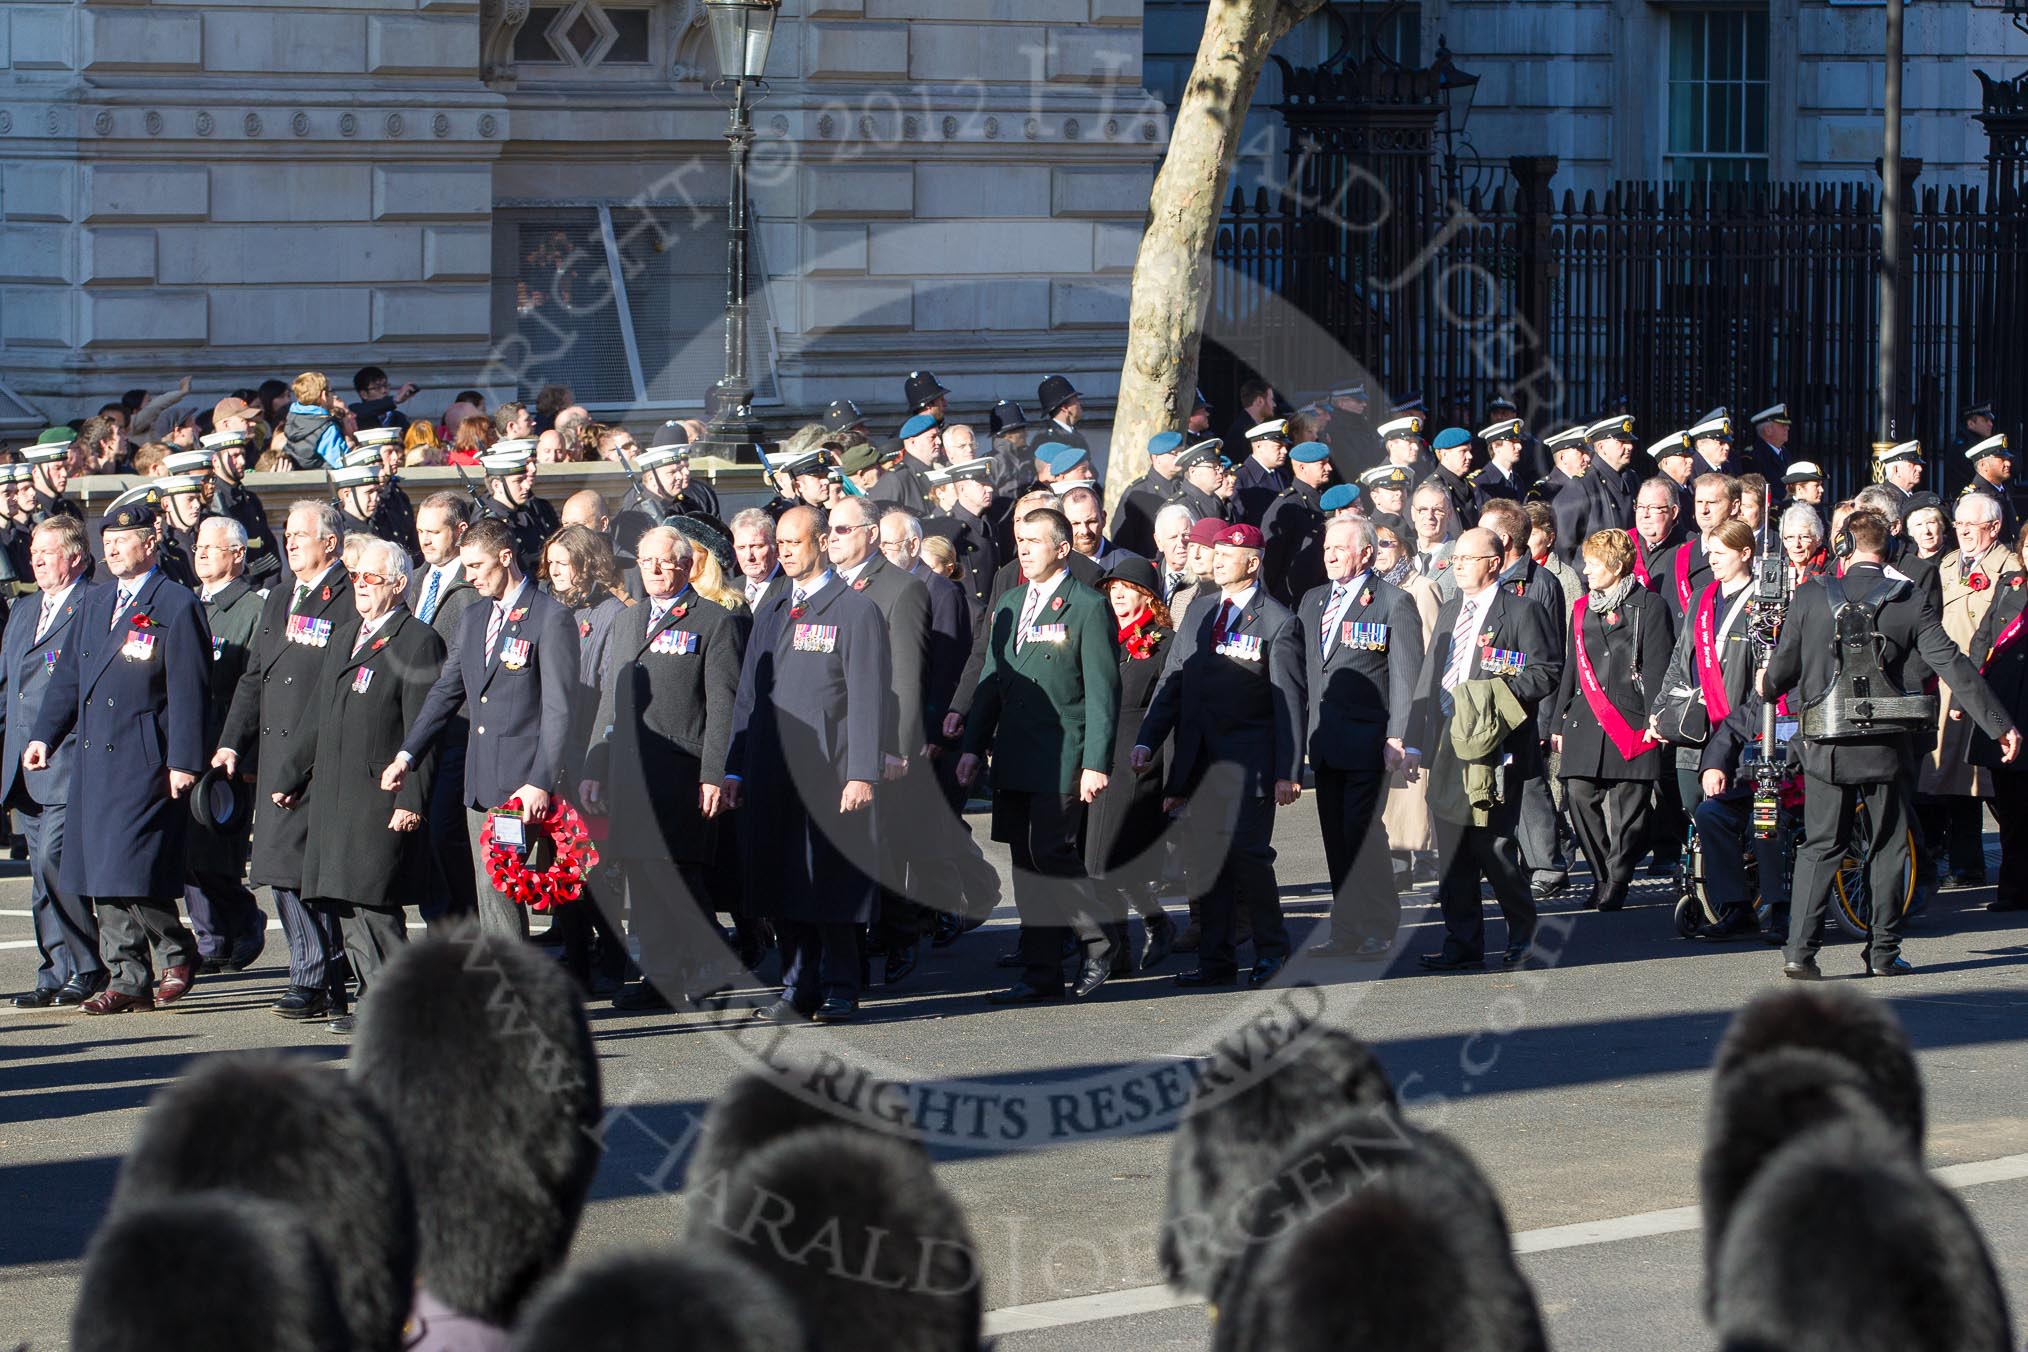 Remembrance Sunday 2012 Cenotaph March Past: Group F13 - Gallantry Medallists League and F14 - National Pigeon War Service..
Whitehall, Cenotaph,
London SW1,

United Kingdom,
on 11 November 2012 at 11:47, image #486